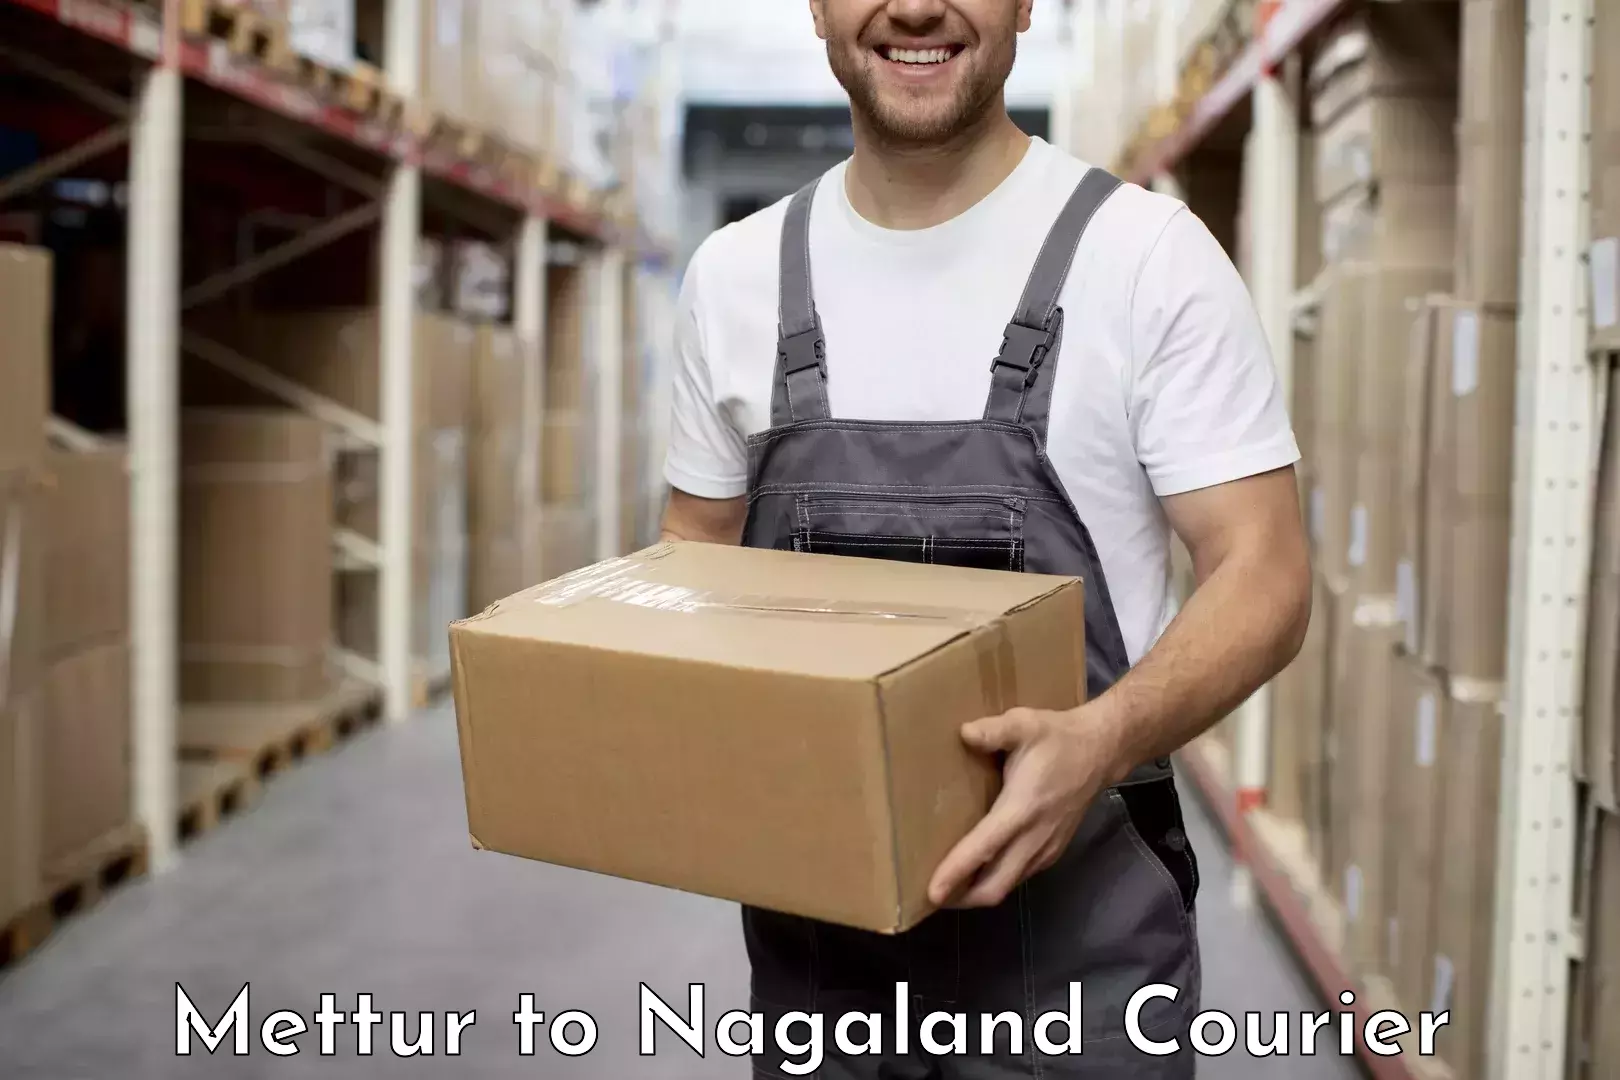 Express package services Mettur to Nagaland